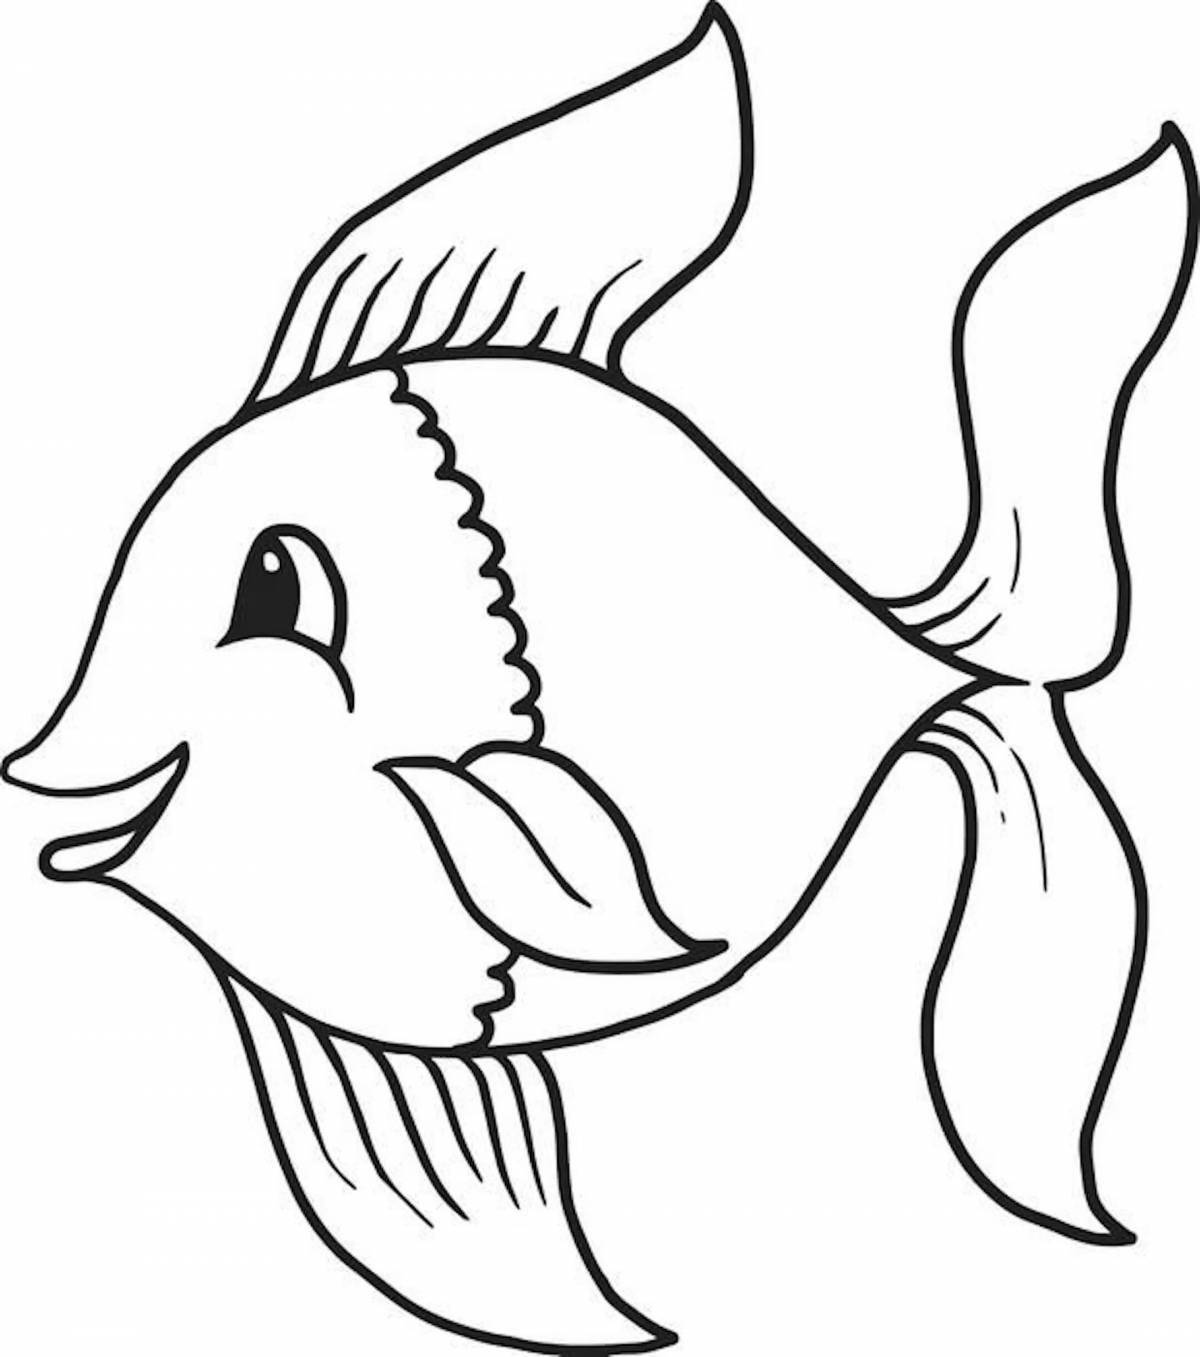 Animated fish coloring page